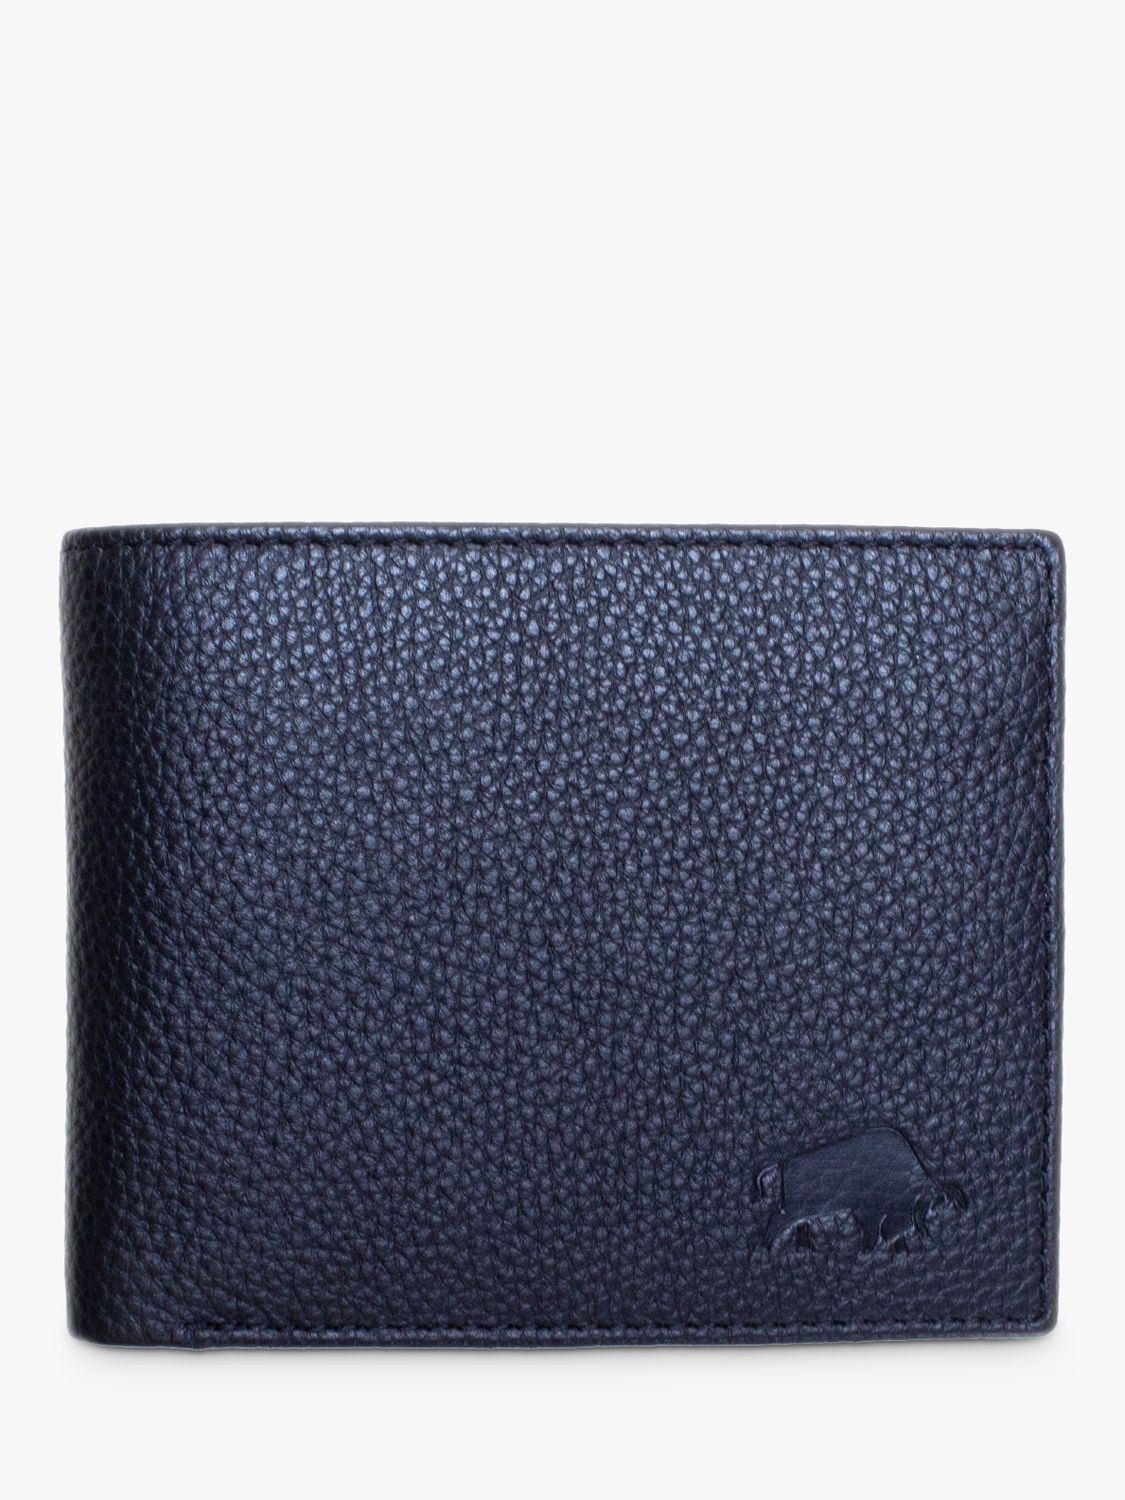 Raging Bull Leather Card Wallet